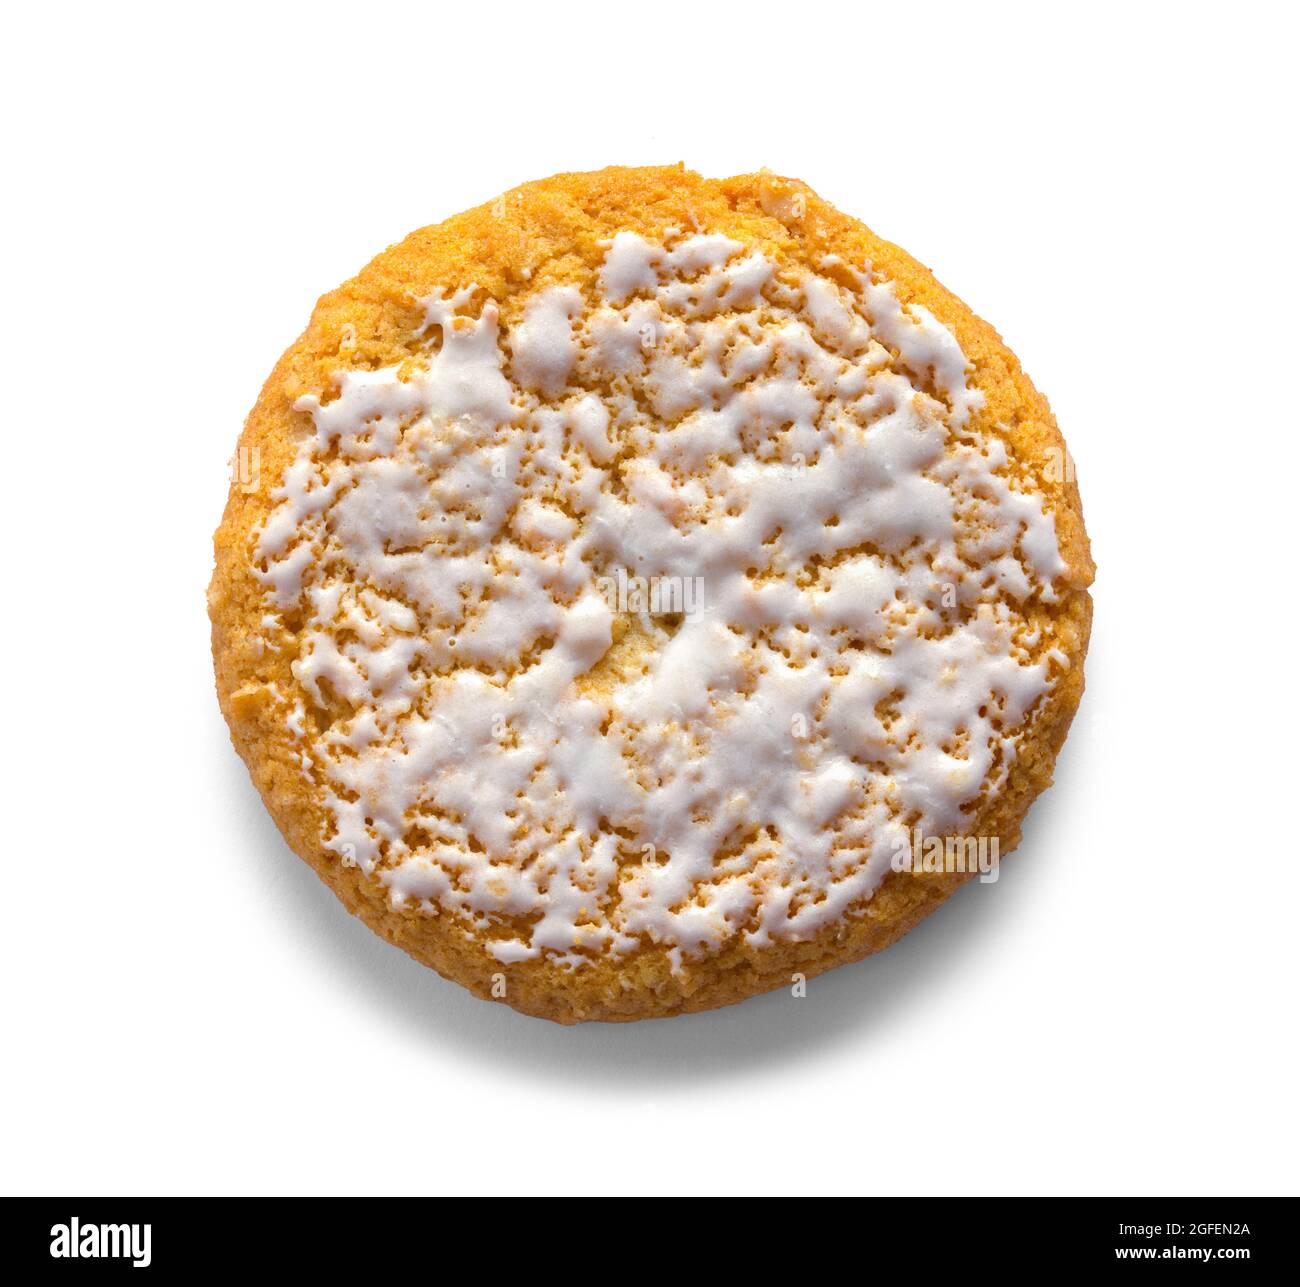 Frosted Oatmeal Cookie Cut Out on White. Stock Photo